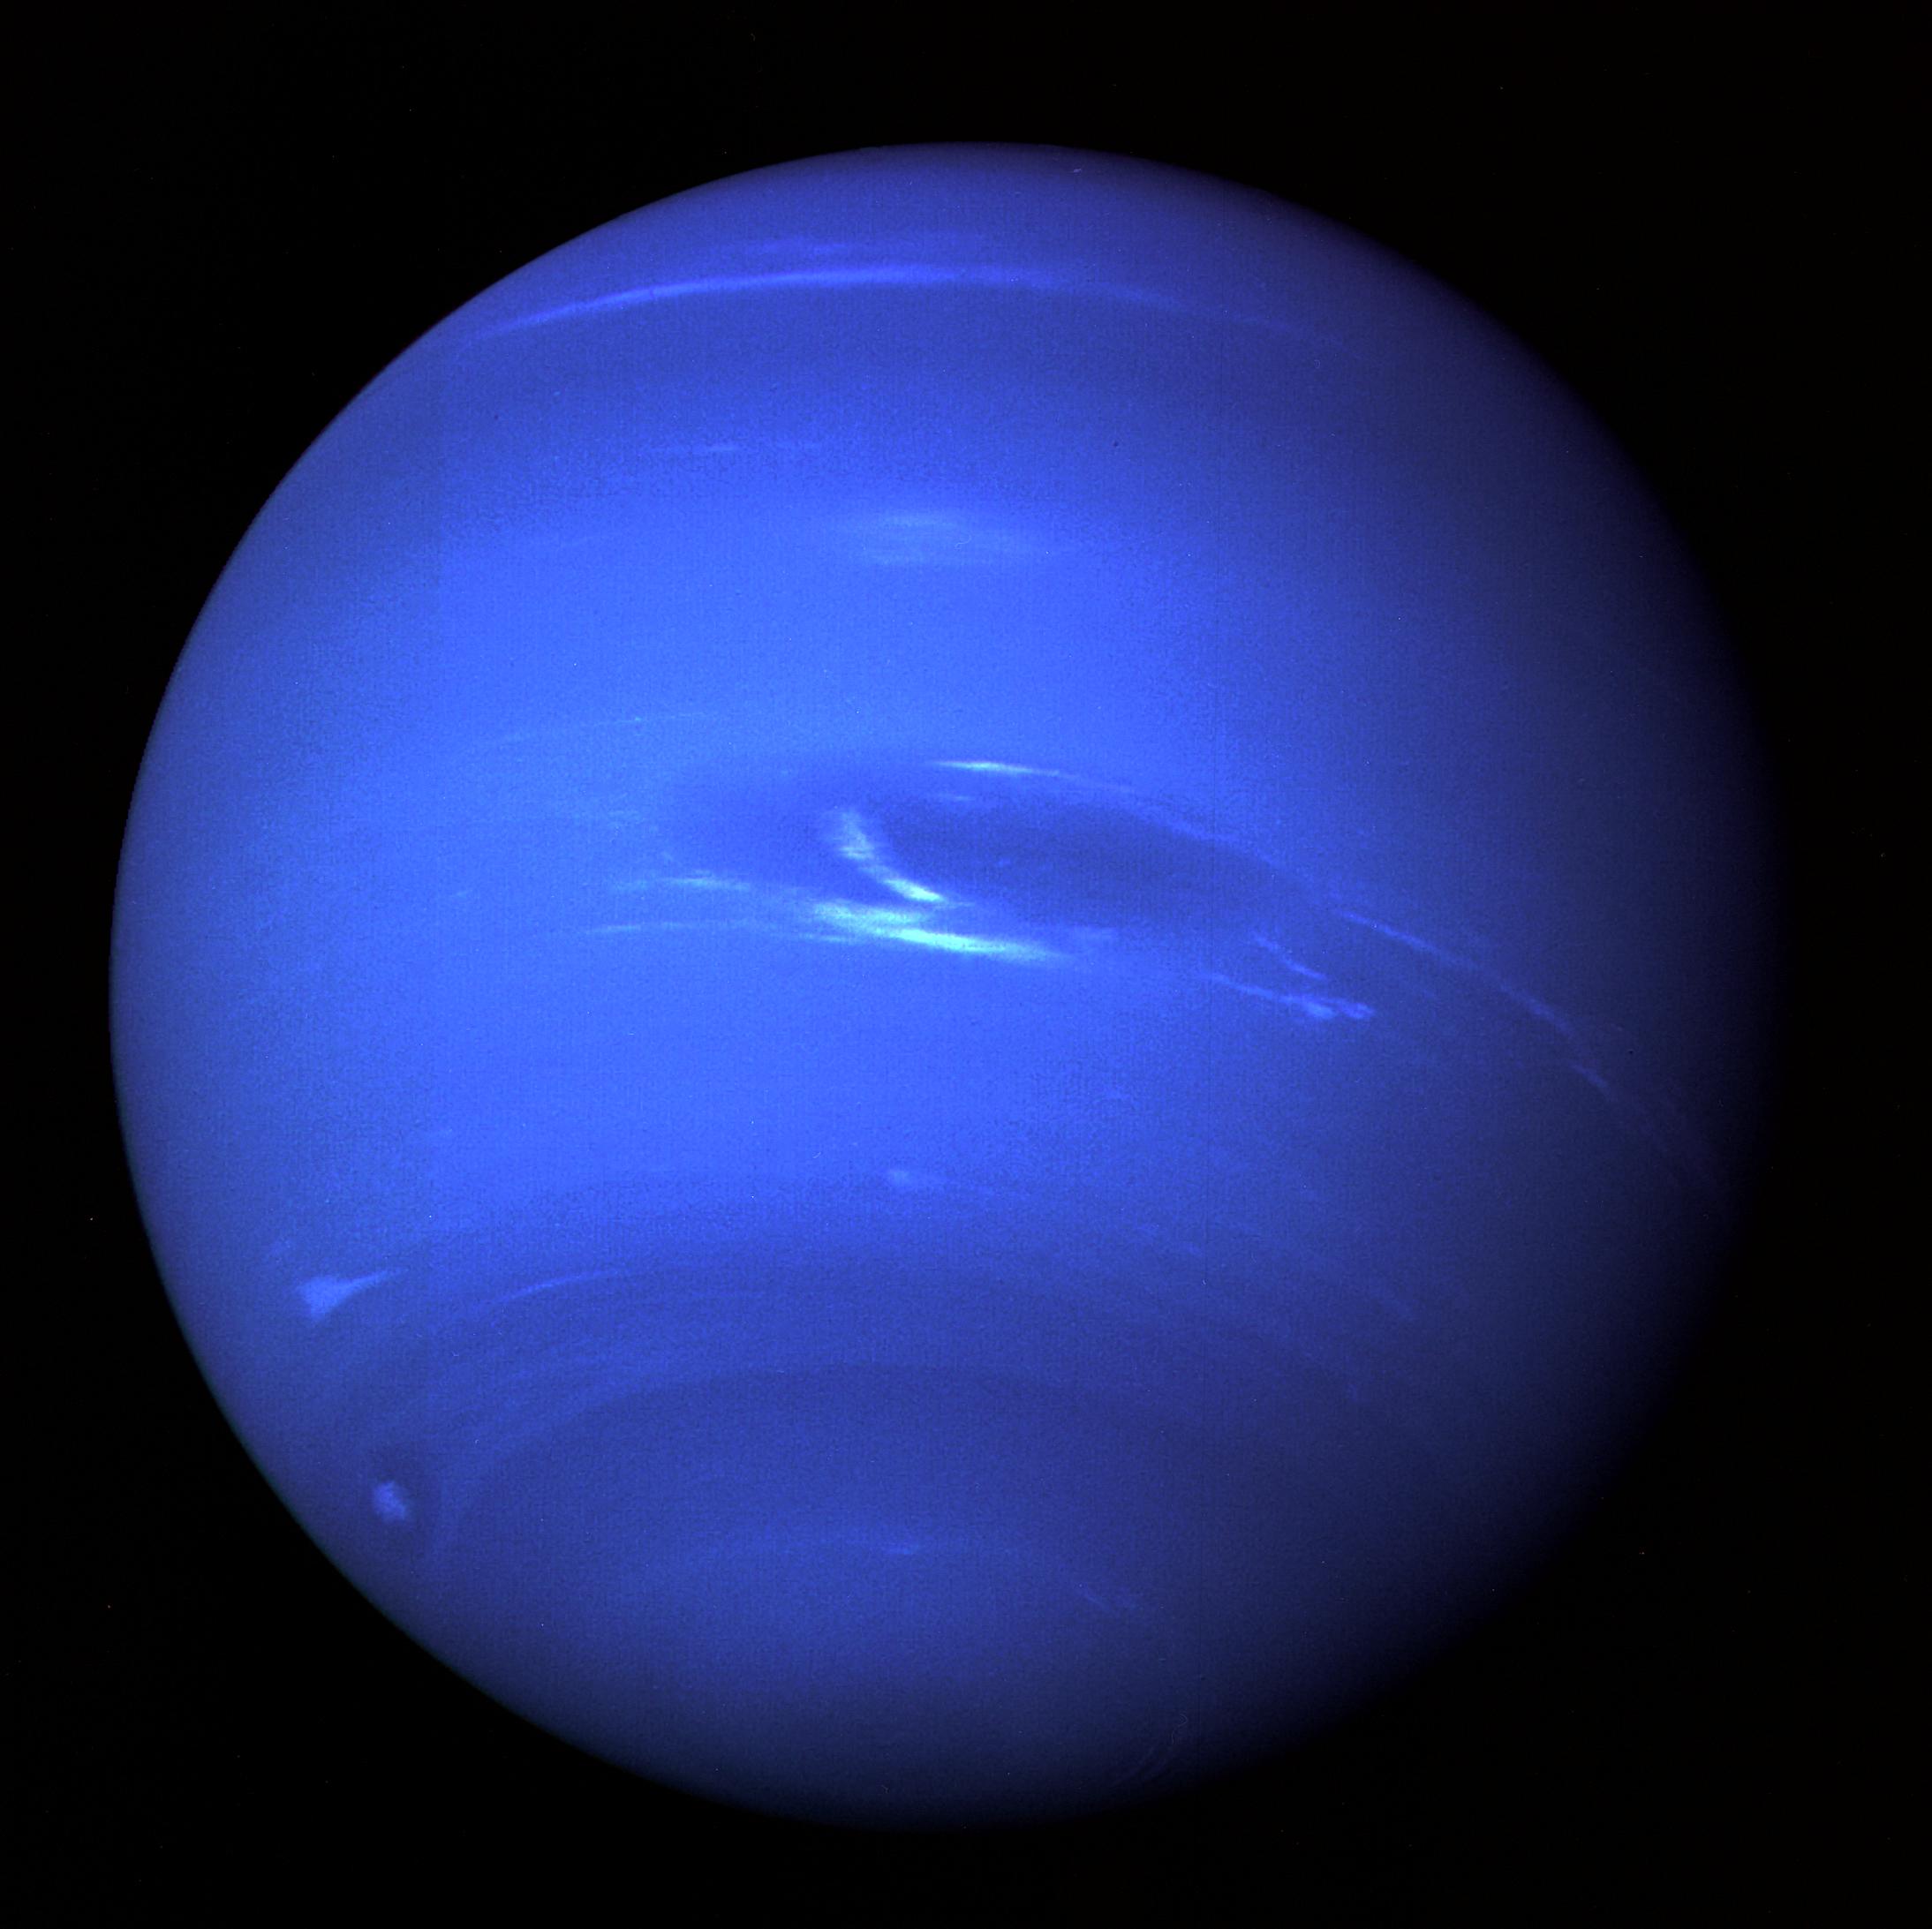 A deep blue planet with wispy white clouds moving across its face.